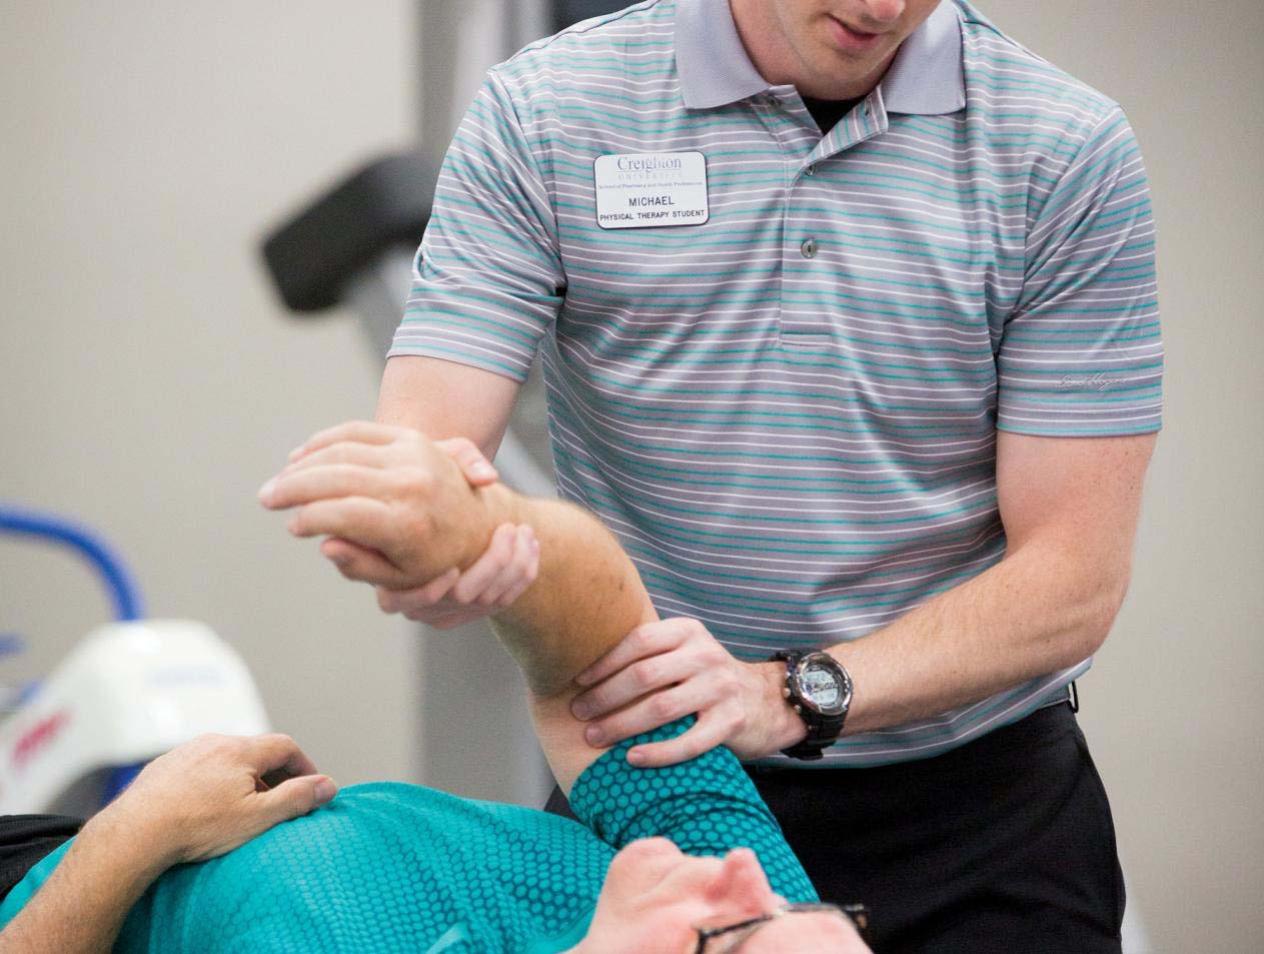 Provider helping patient with his arm